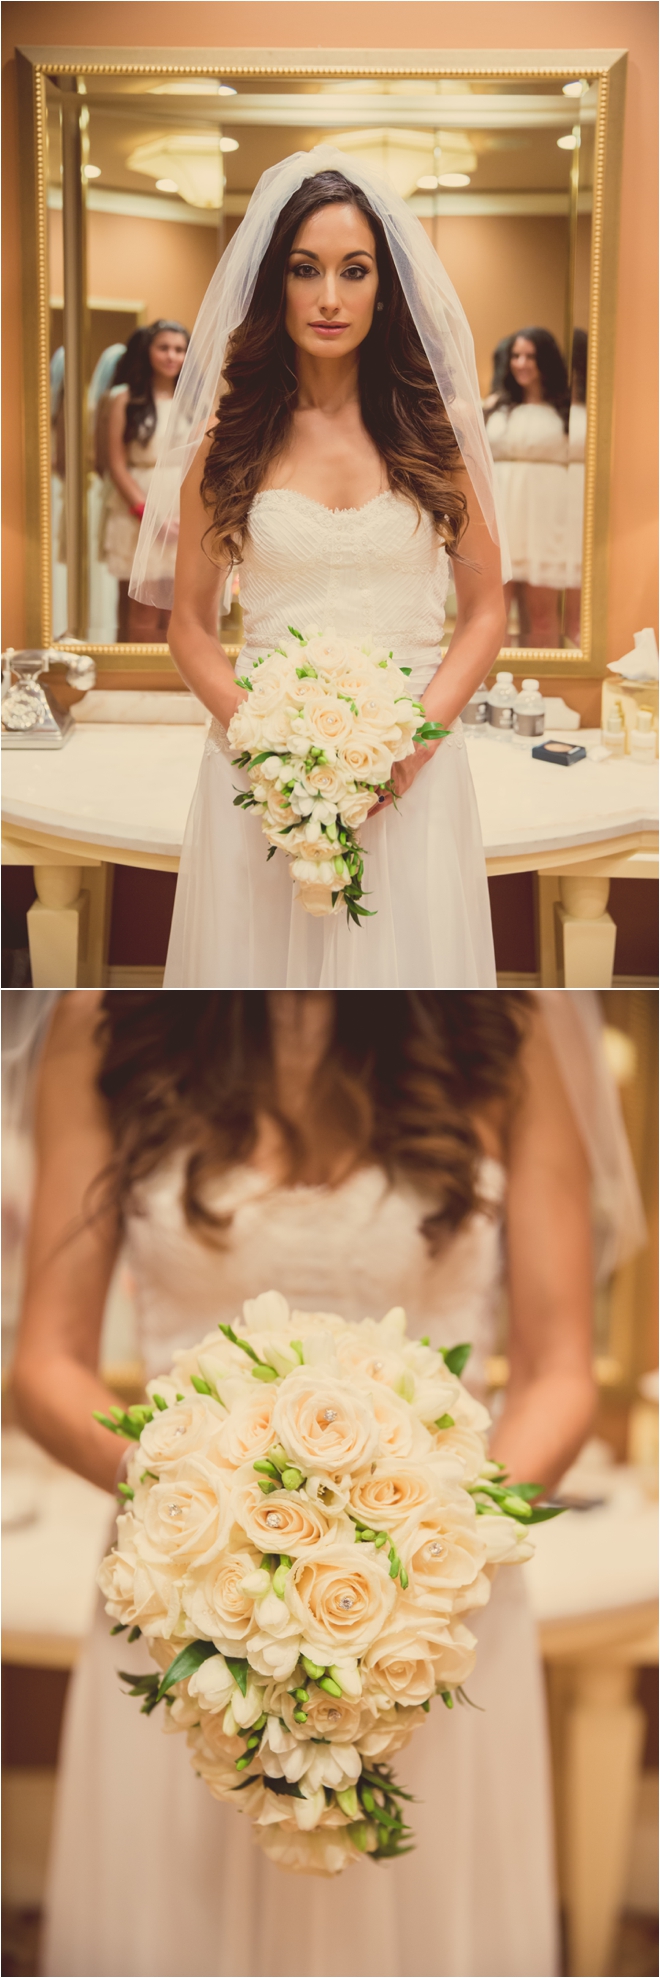 Las Vegas Wedding with Houstonian Bride, English Groom and French Proposal, by Ama Photography & Cinema 